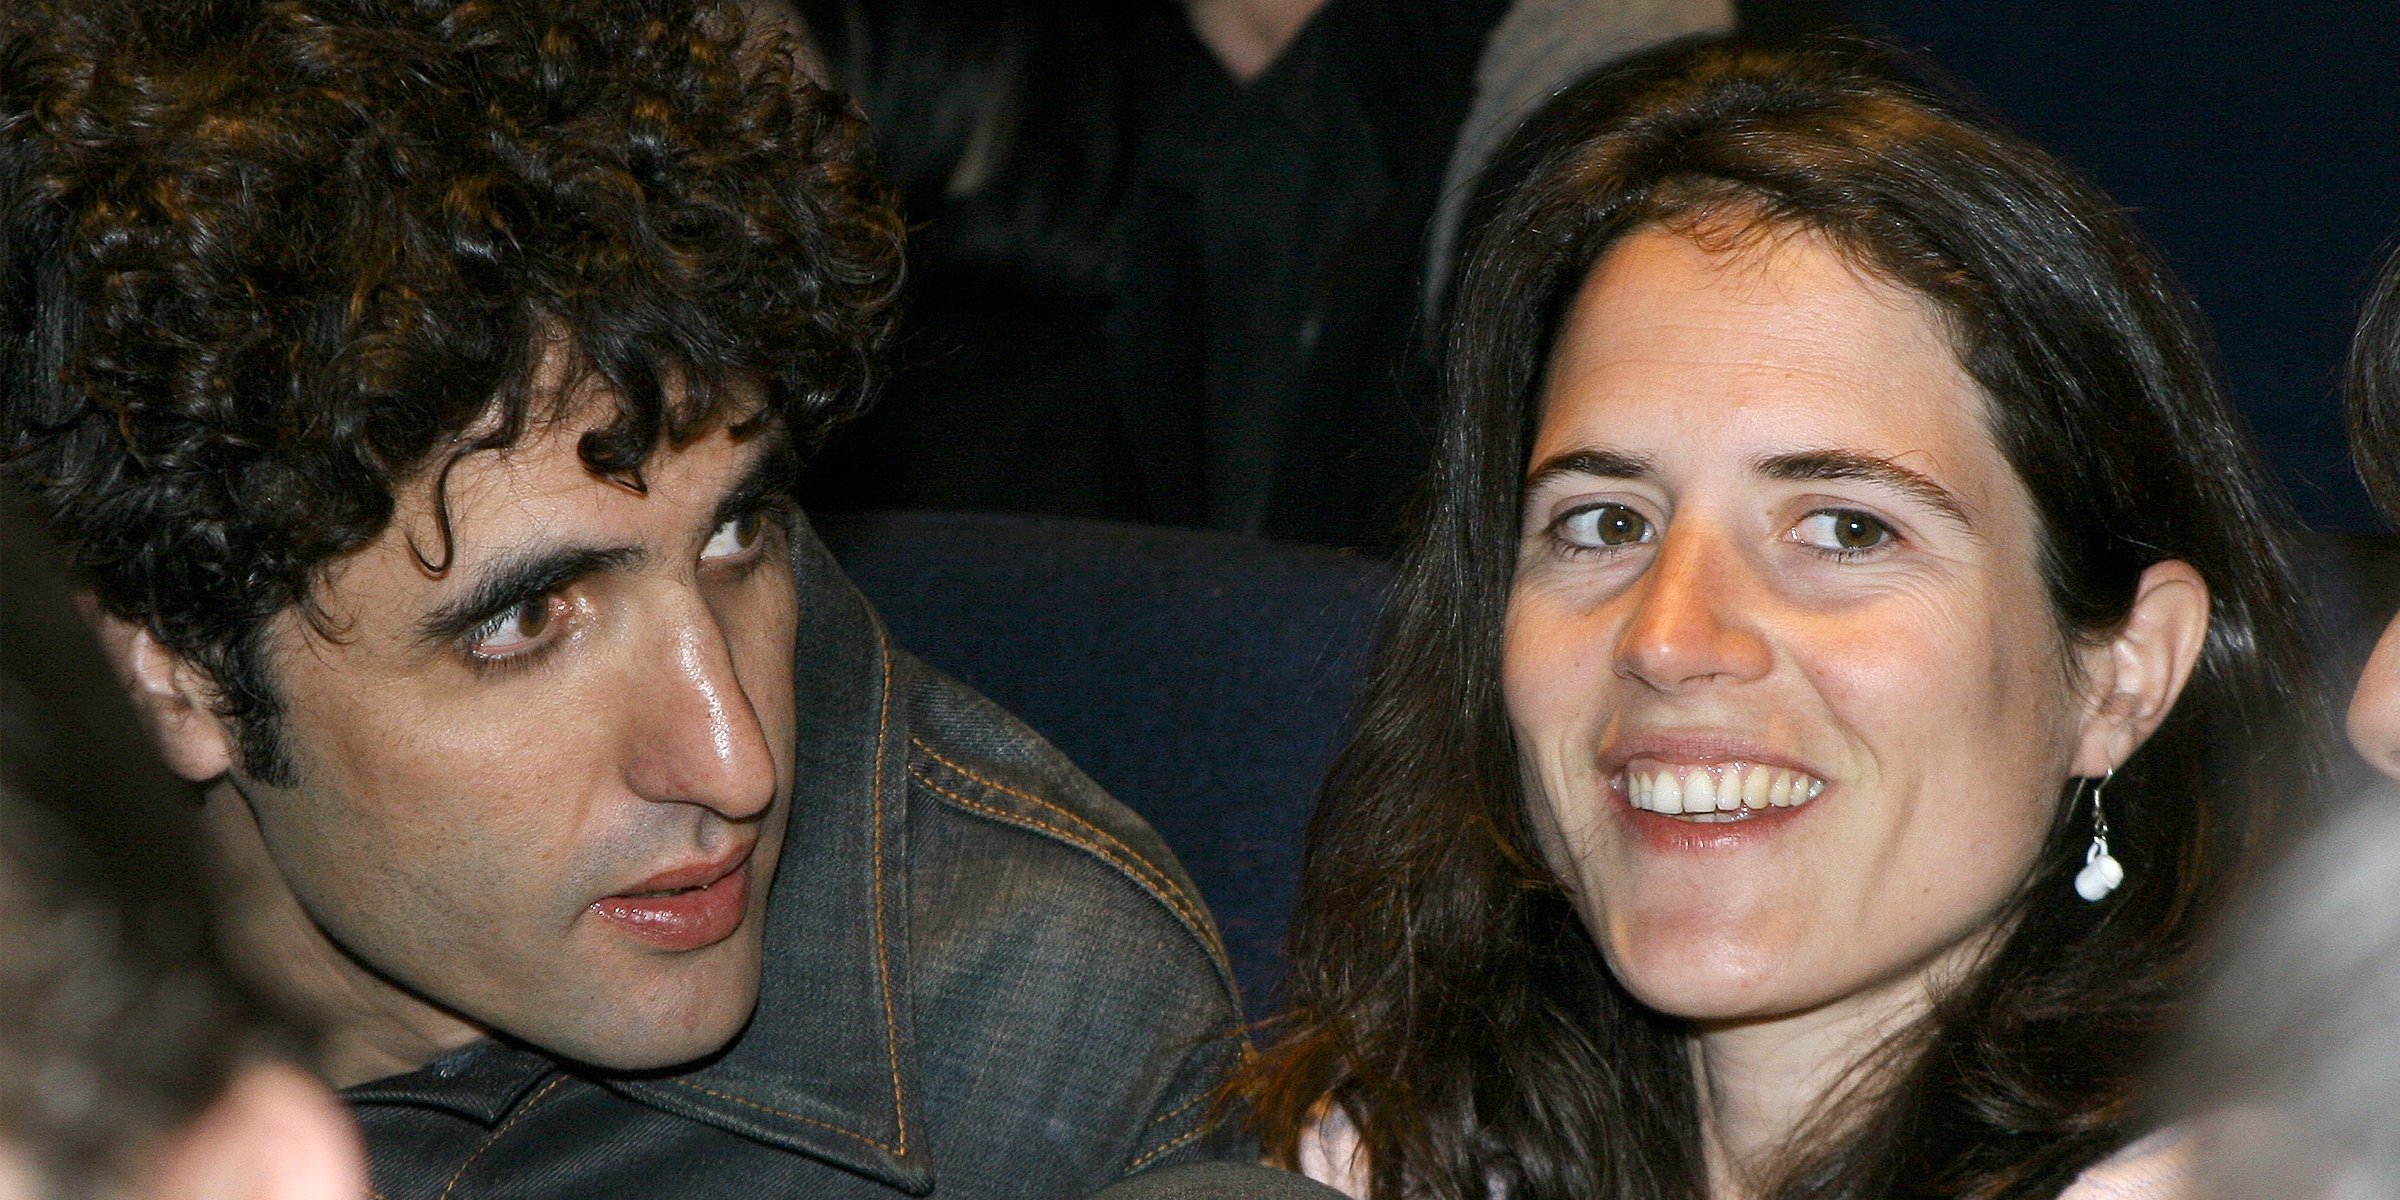 Mohamed Ulad-Mohand et Mazarine Pingeot | Photo : Getty Images